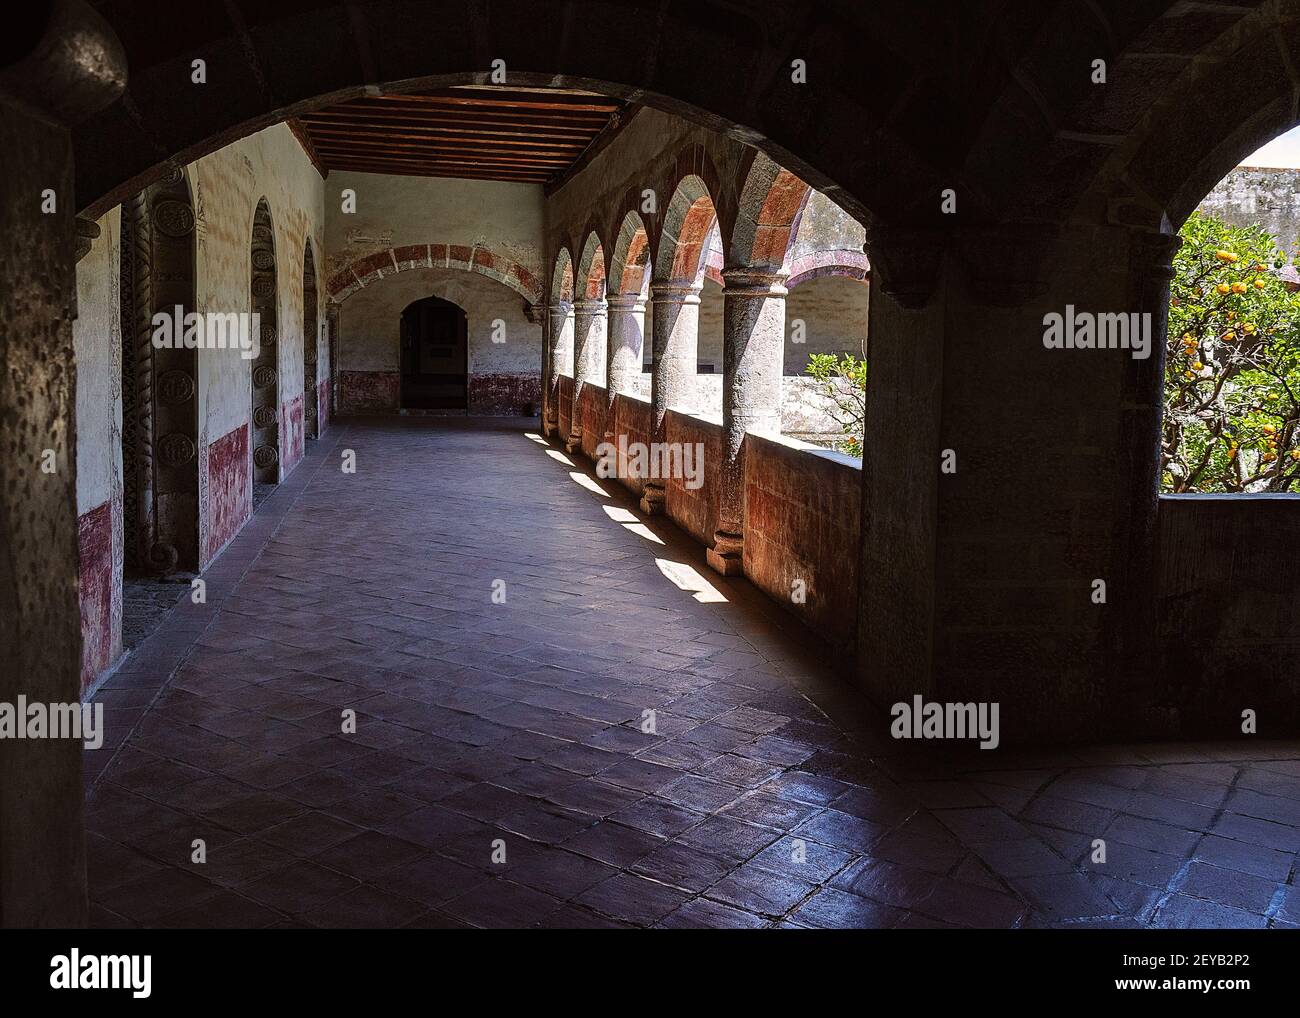 Corridor in a XVI century former Franciscan convent, where lights and shadows create an atmosphere of mysticism to visitors Stock Photo